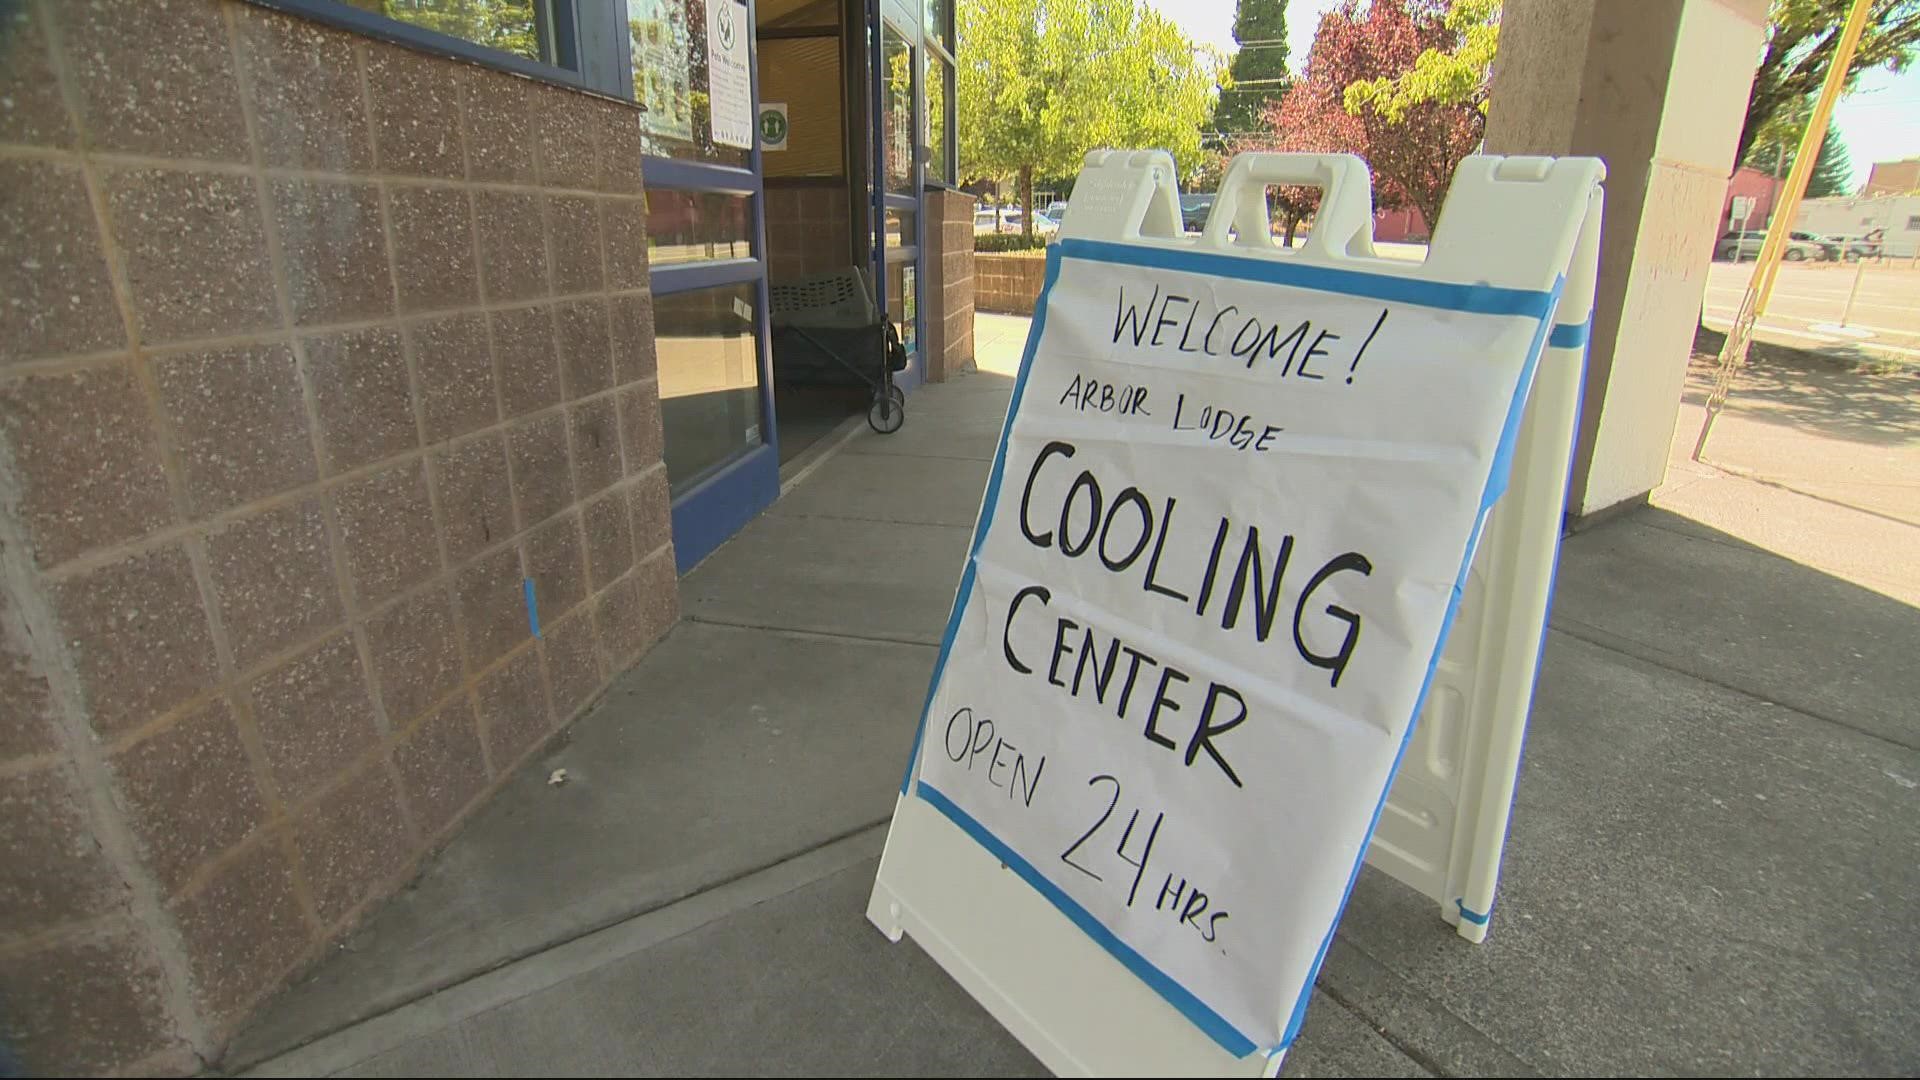 Many cooling centers across Oregon are opened to help people escape the heat and stay safe. Tim Gordon visited Arbor Lodge cooling center in North Portland.